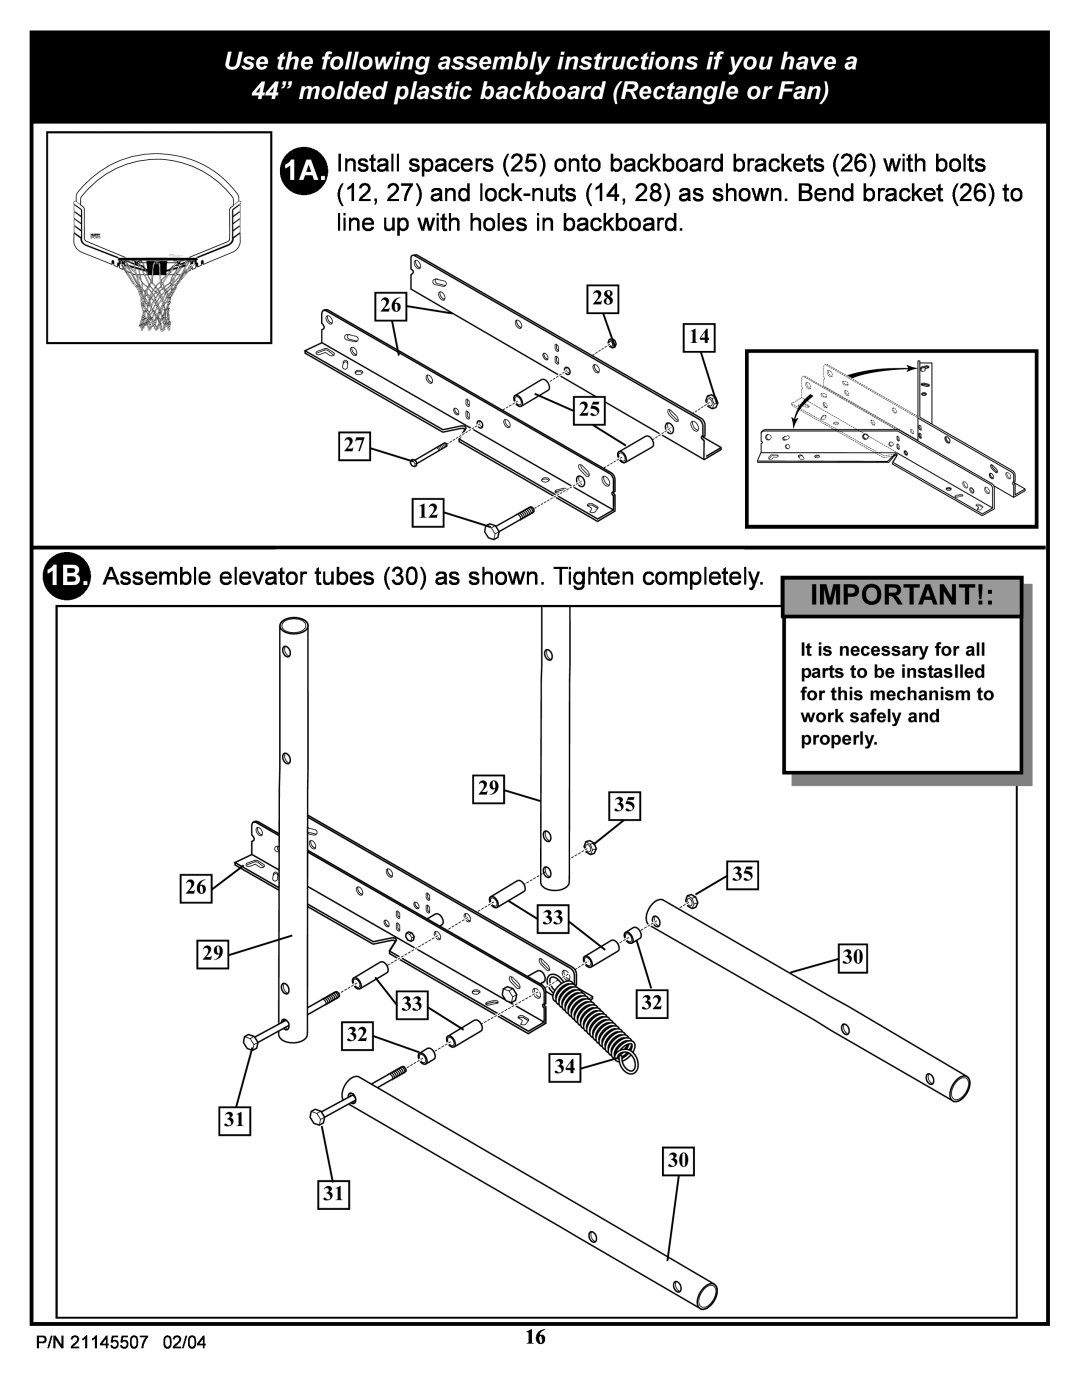 Huffy Sports Basketball Systems manual 1B. Assemble elevator tubes 30 as shown. Tighten completely 